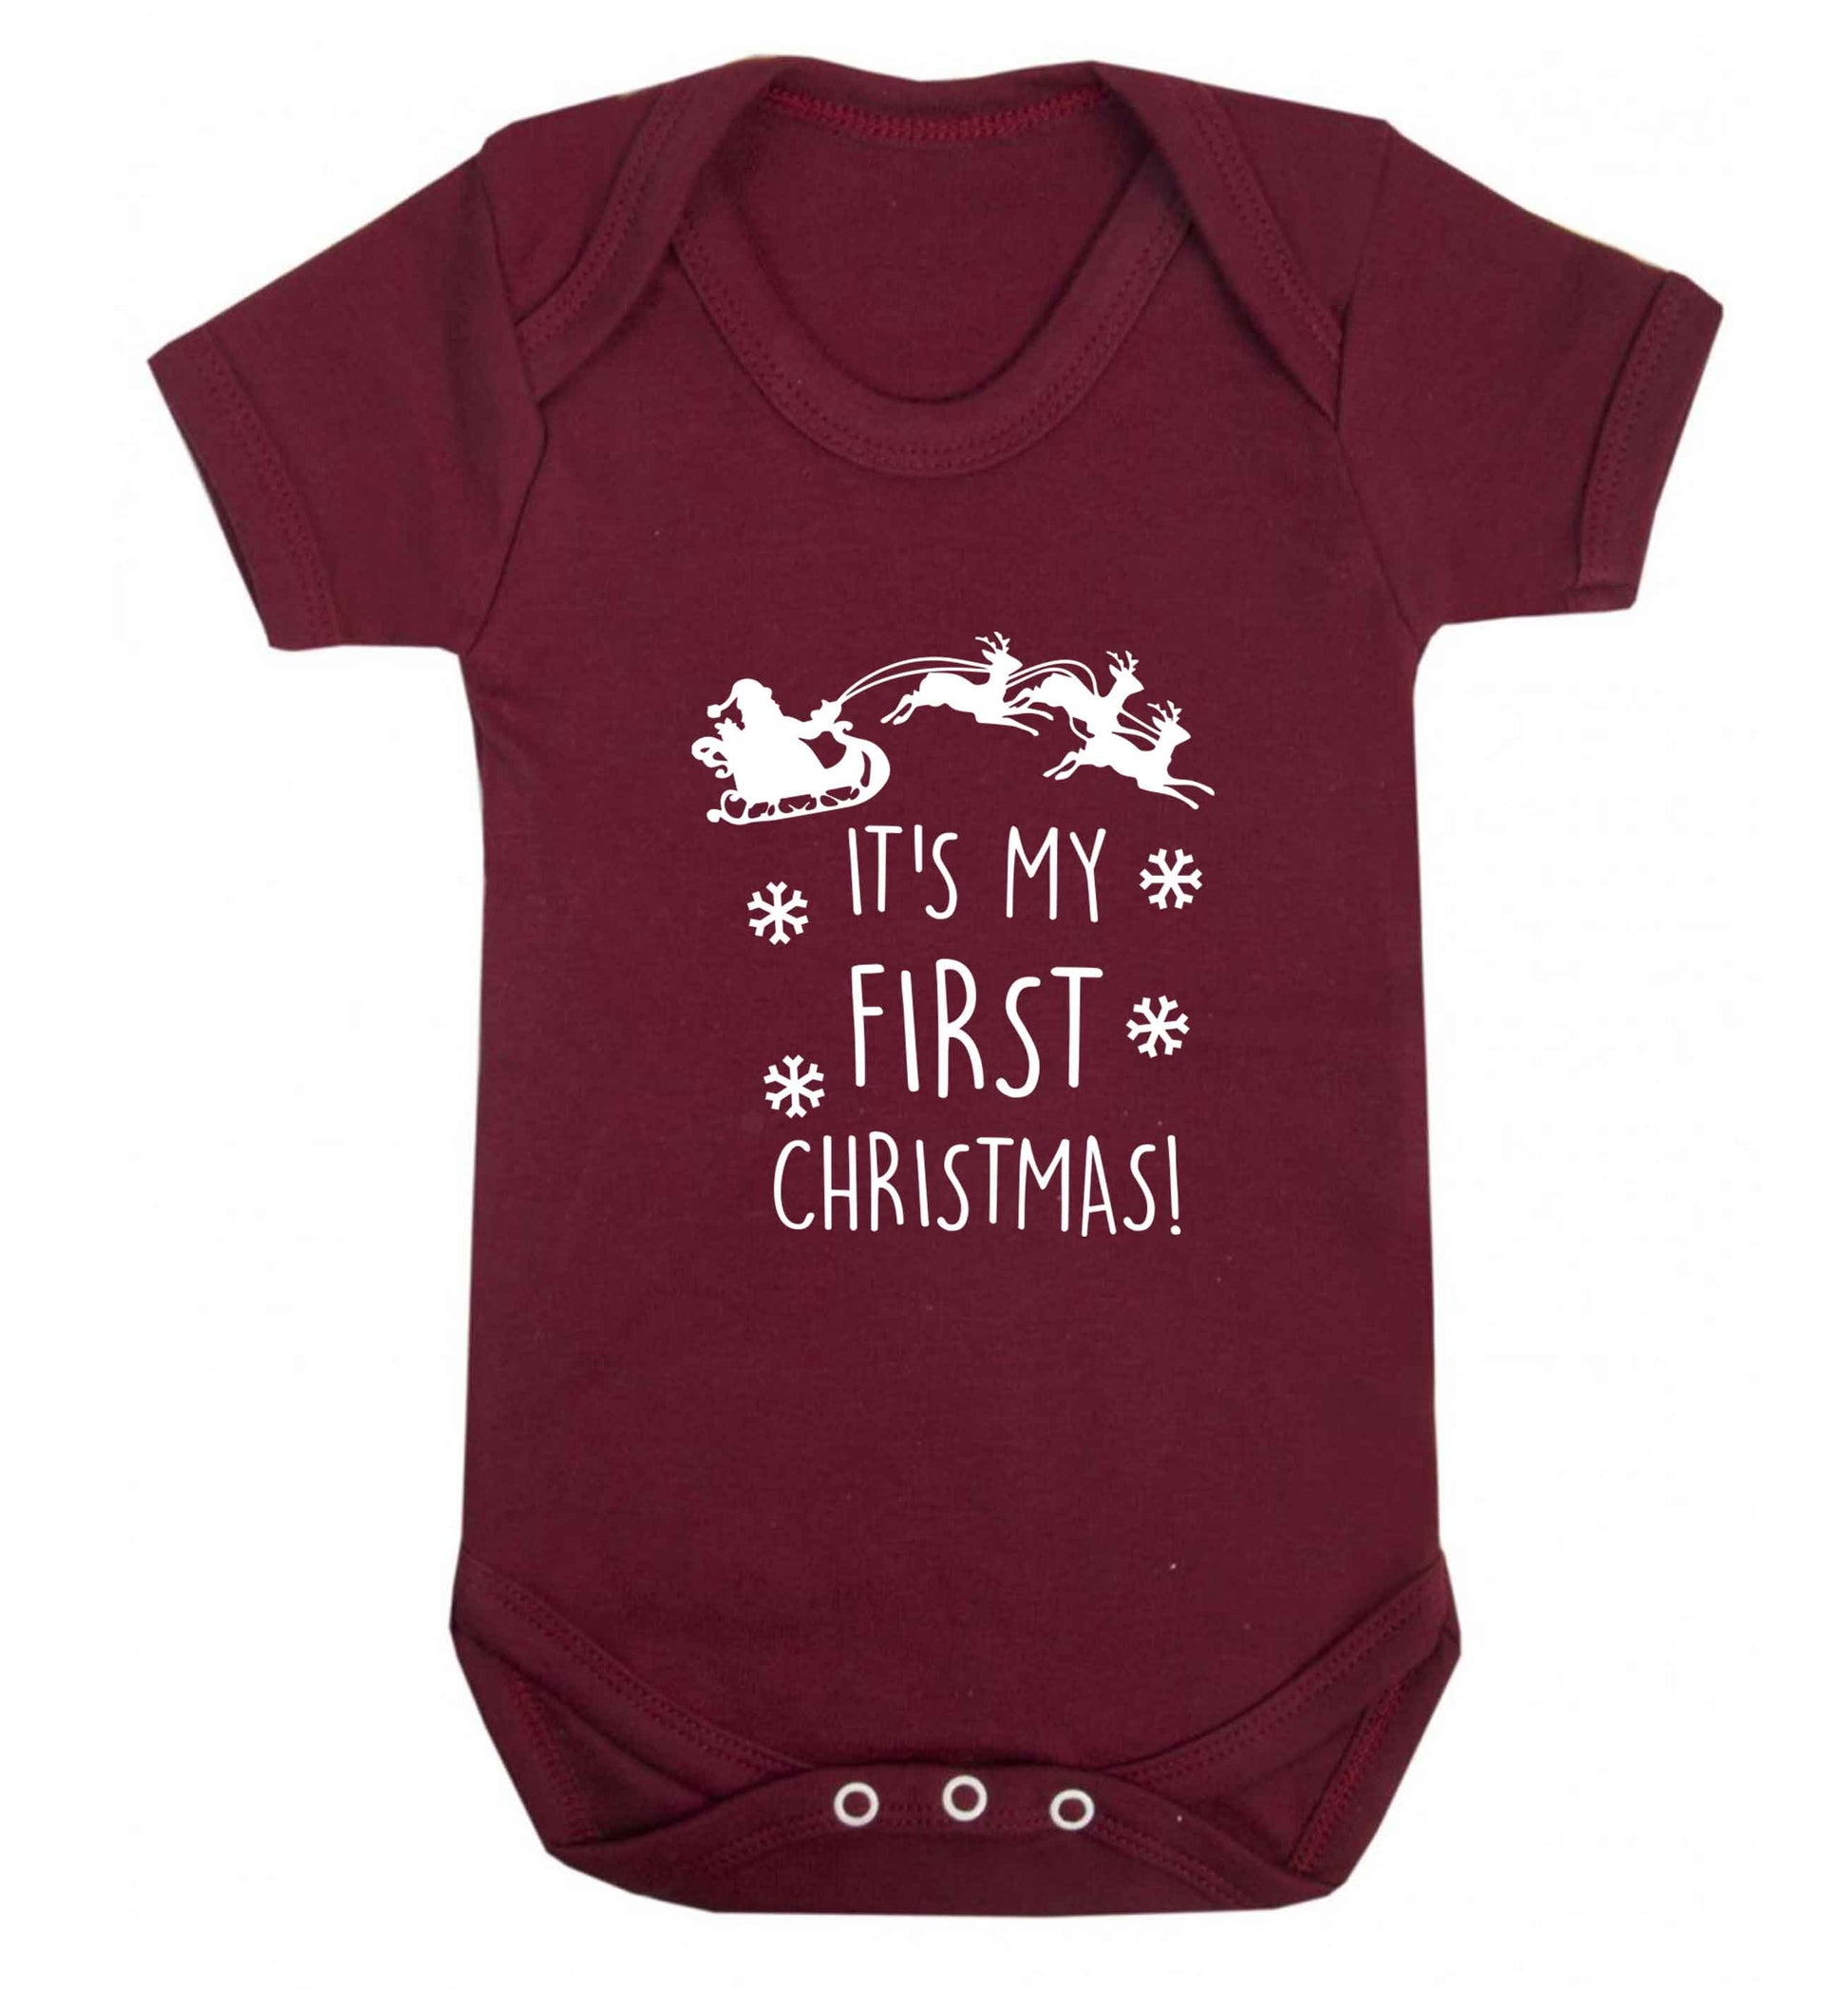 It's my first Christmas - Santa sleigh text baby vest maroon 18-24 months